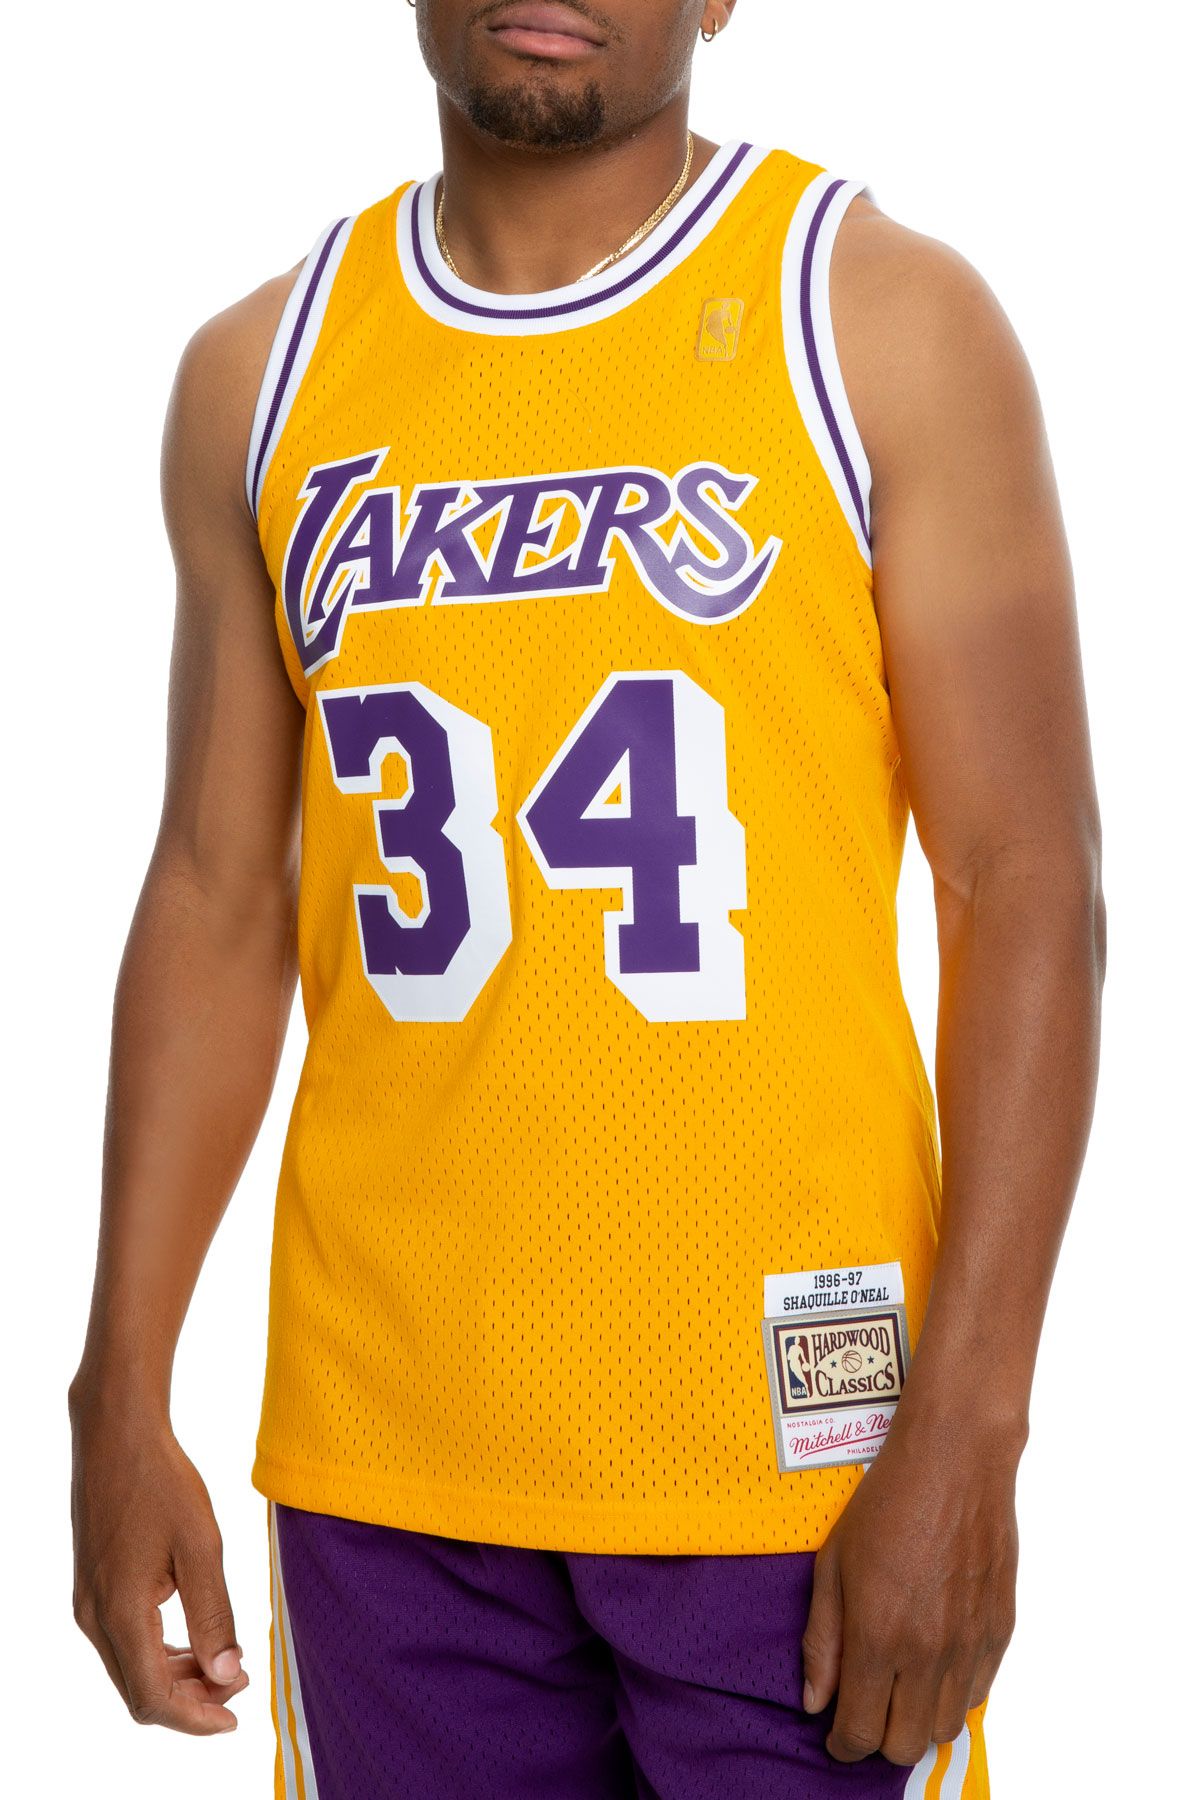 SHAQUILLE O'NEAL LOS ANGELES LAKERS 1996-97 HOME SWINGMAN JERSEY